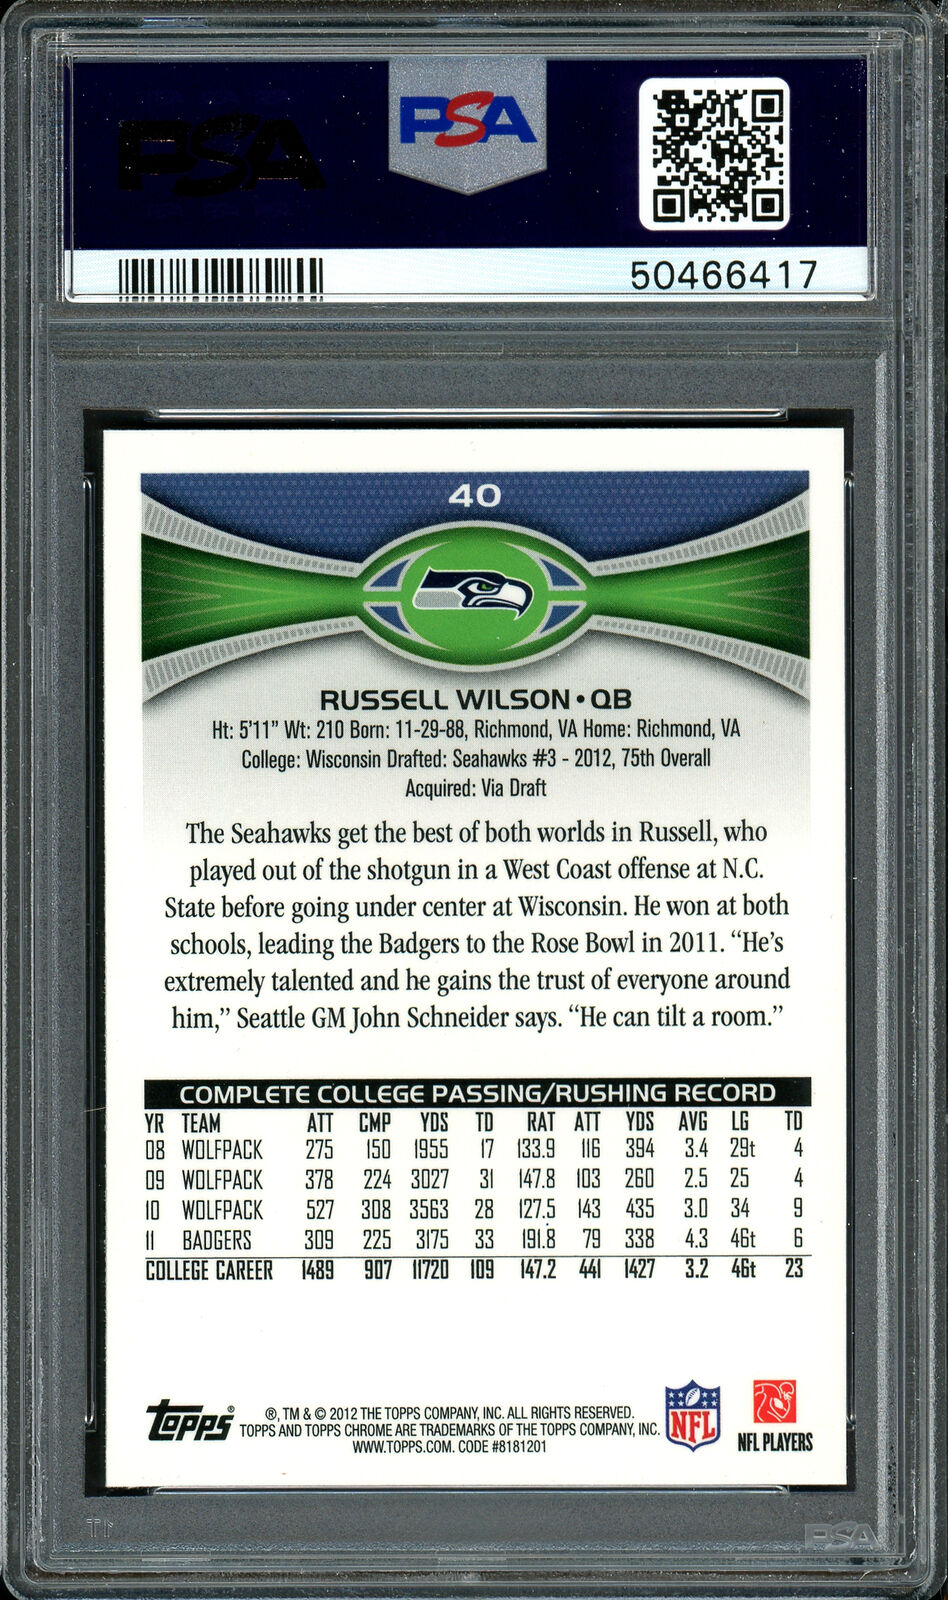 Russell Wilson Autographed Signed 2012 Topps Chrome RC PSA 9 Auto 9 50466417 Image 3